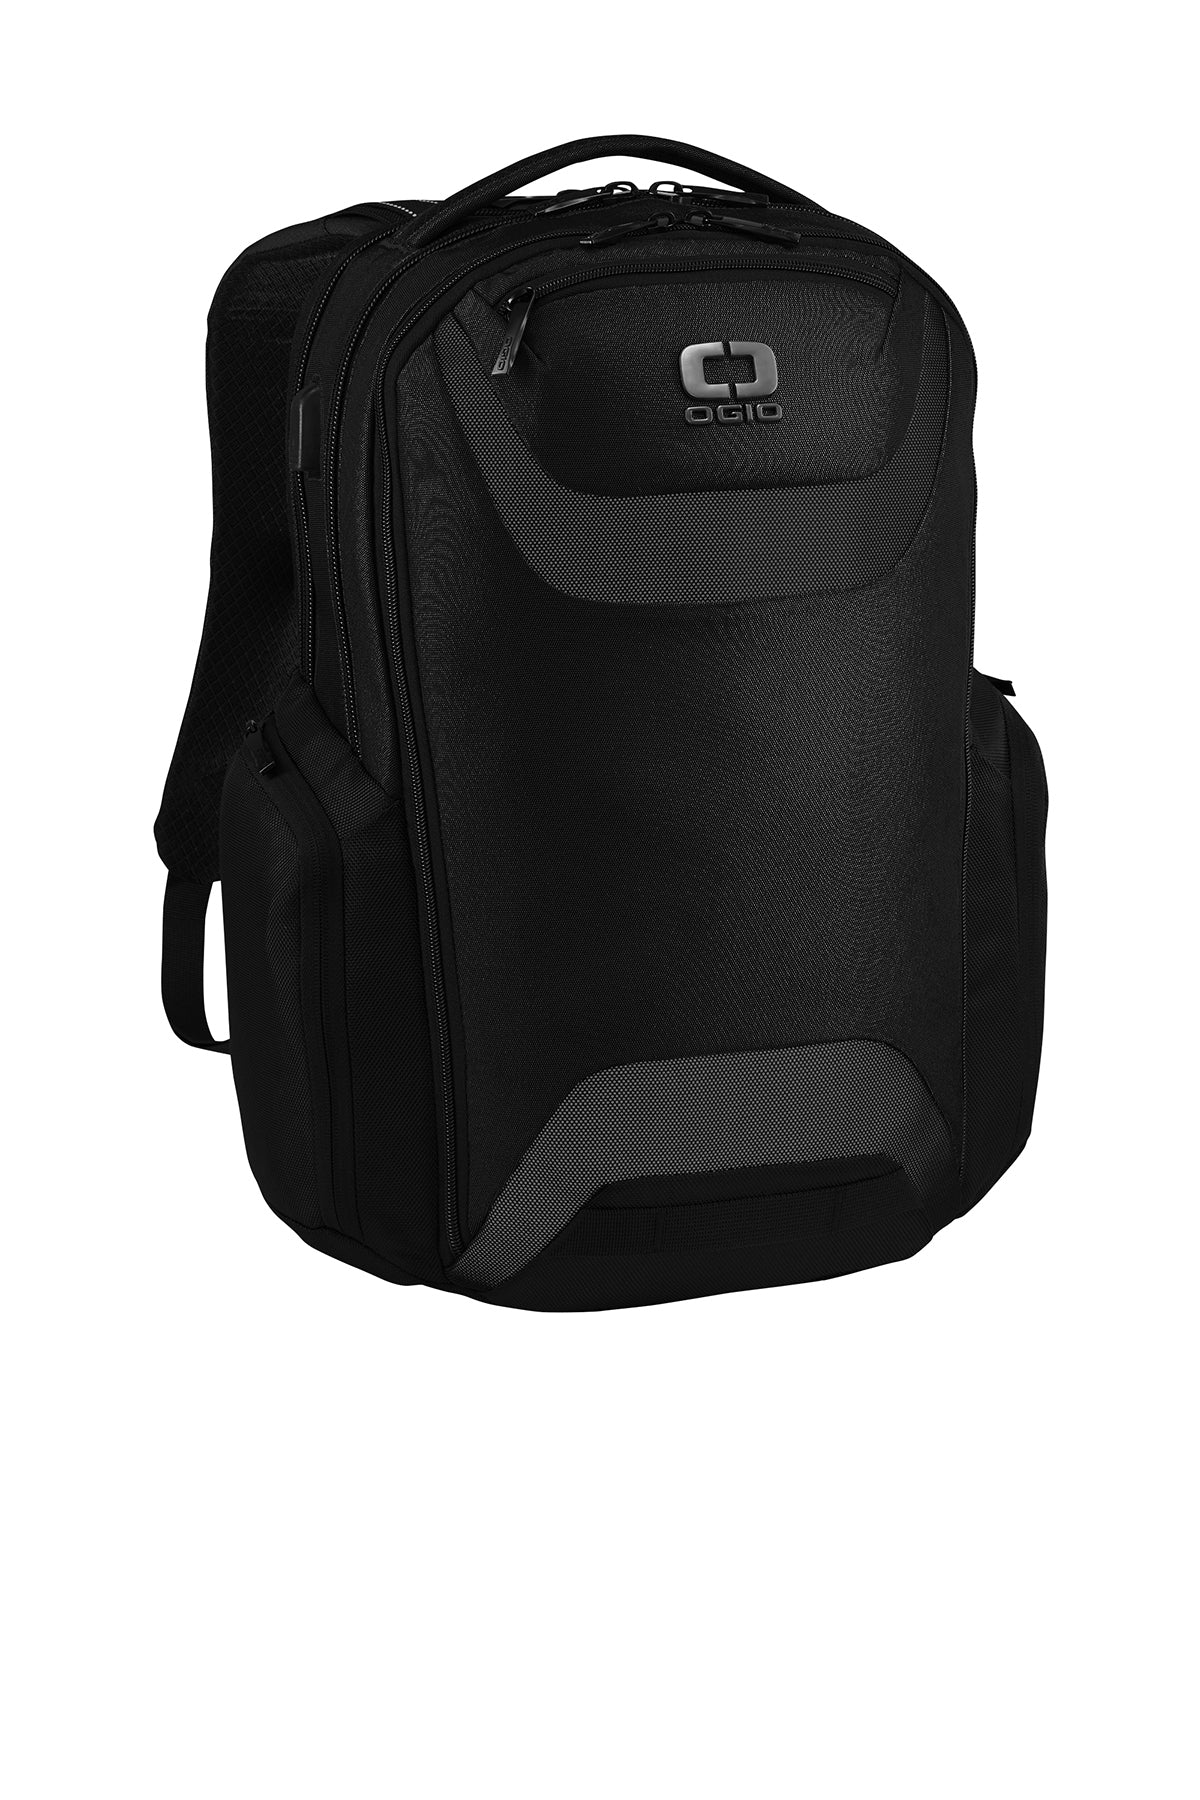 OGIO Connected Pack Black